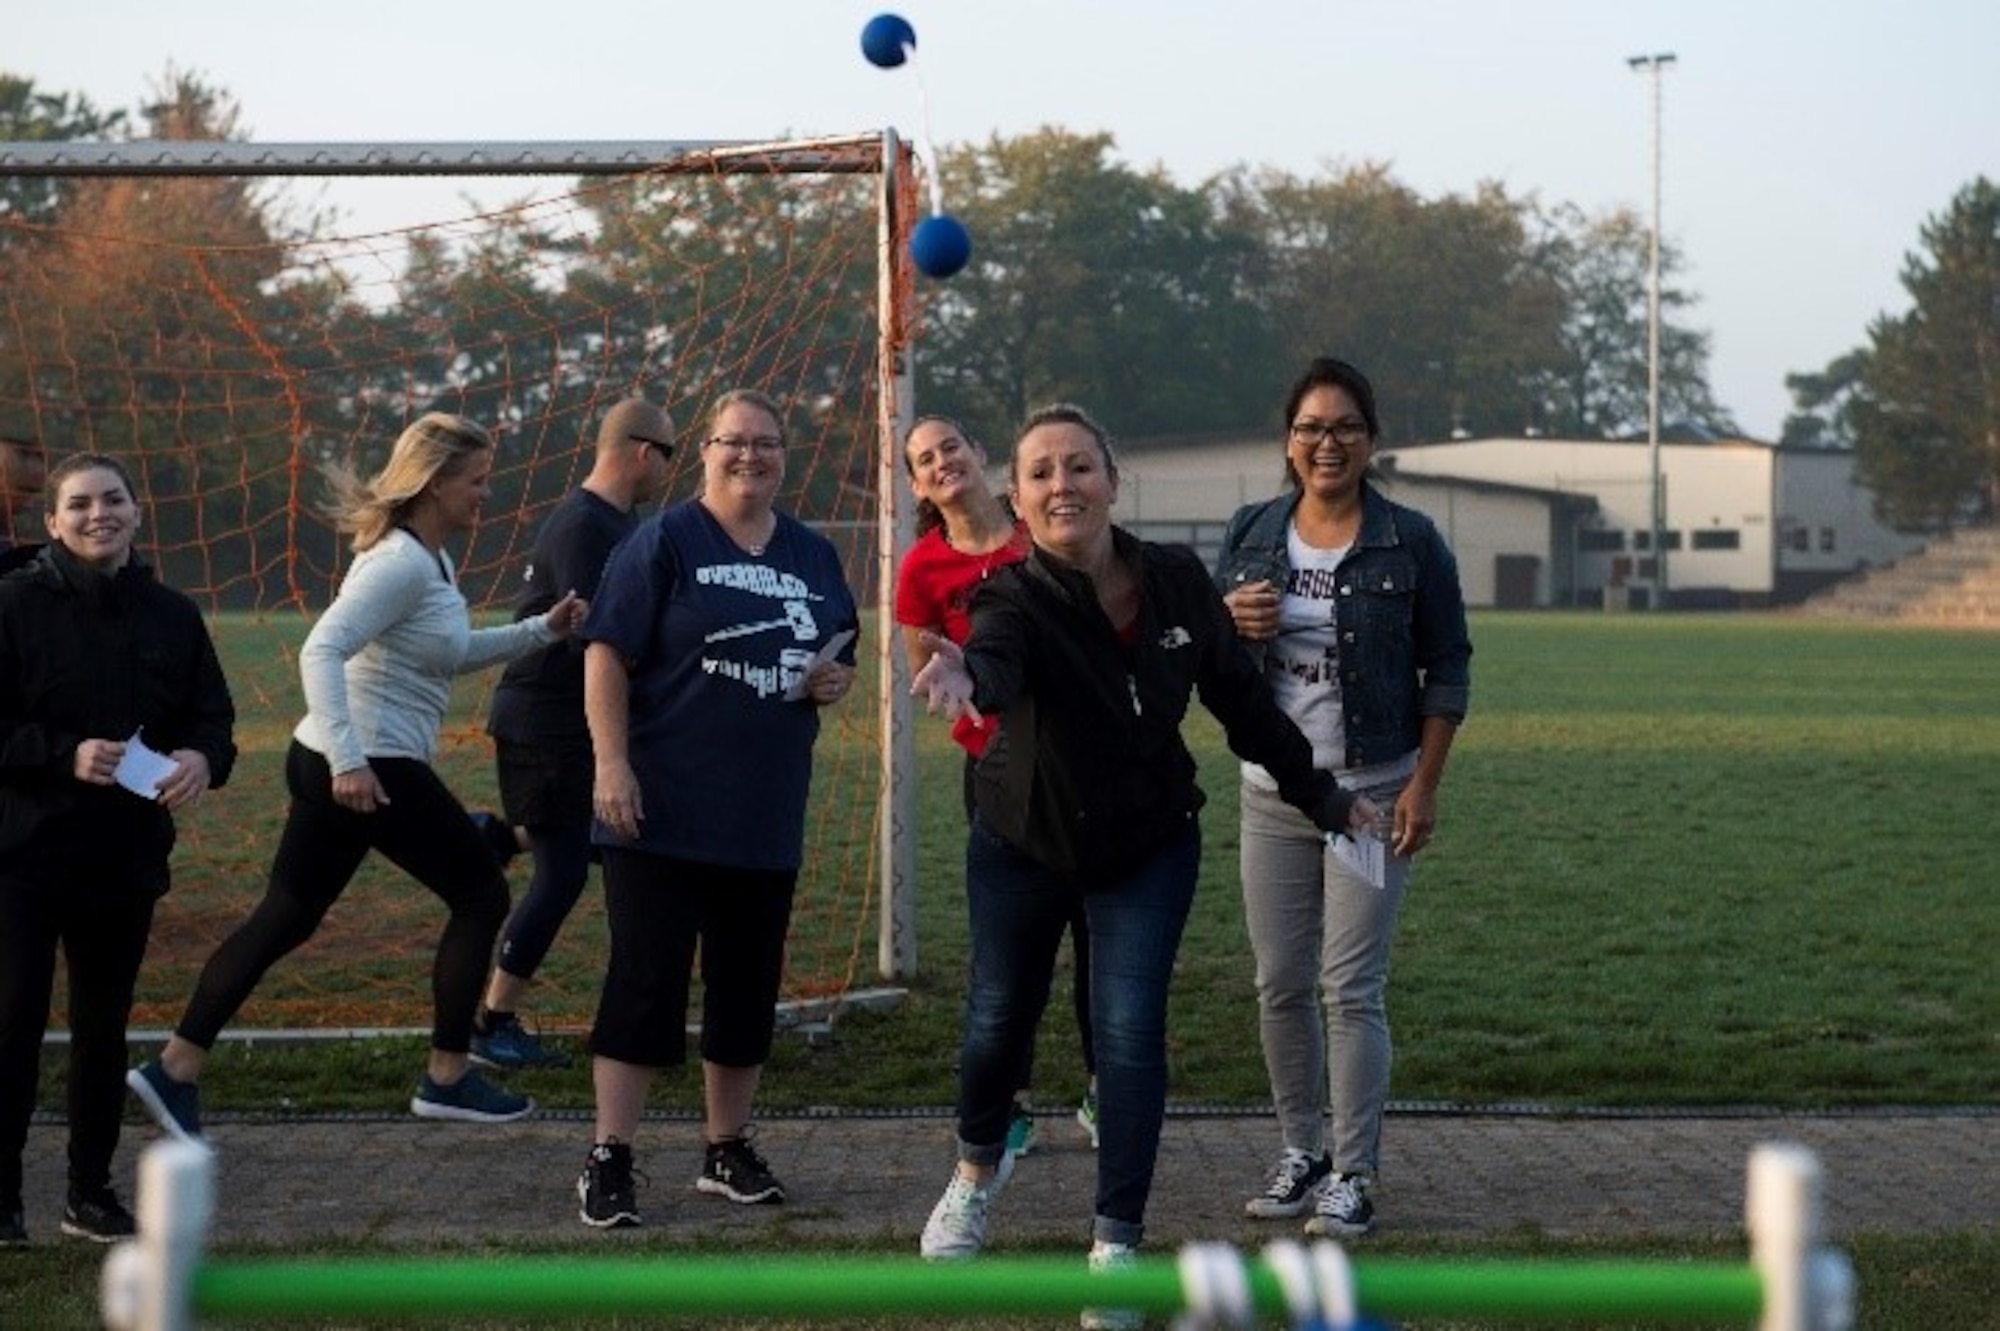 Danielle Struckel, a Team Ramstein spouse, throws a round of Ladder Ball during The Amazing Base competition on Ramstein Air Base, Germany, Oct. 10, 2018. The Amazing Base teams completed challenges and solved riddles around the base.